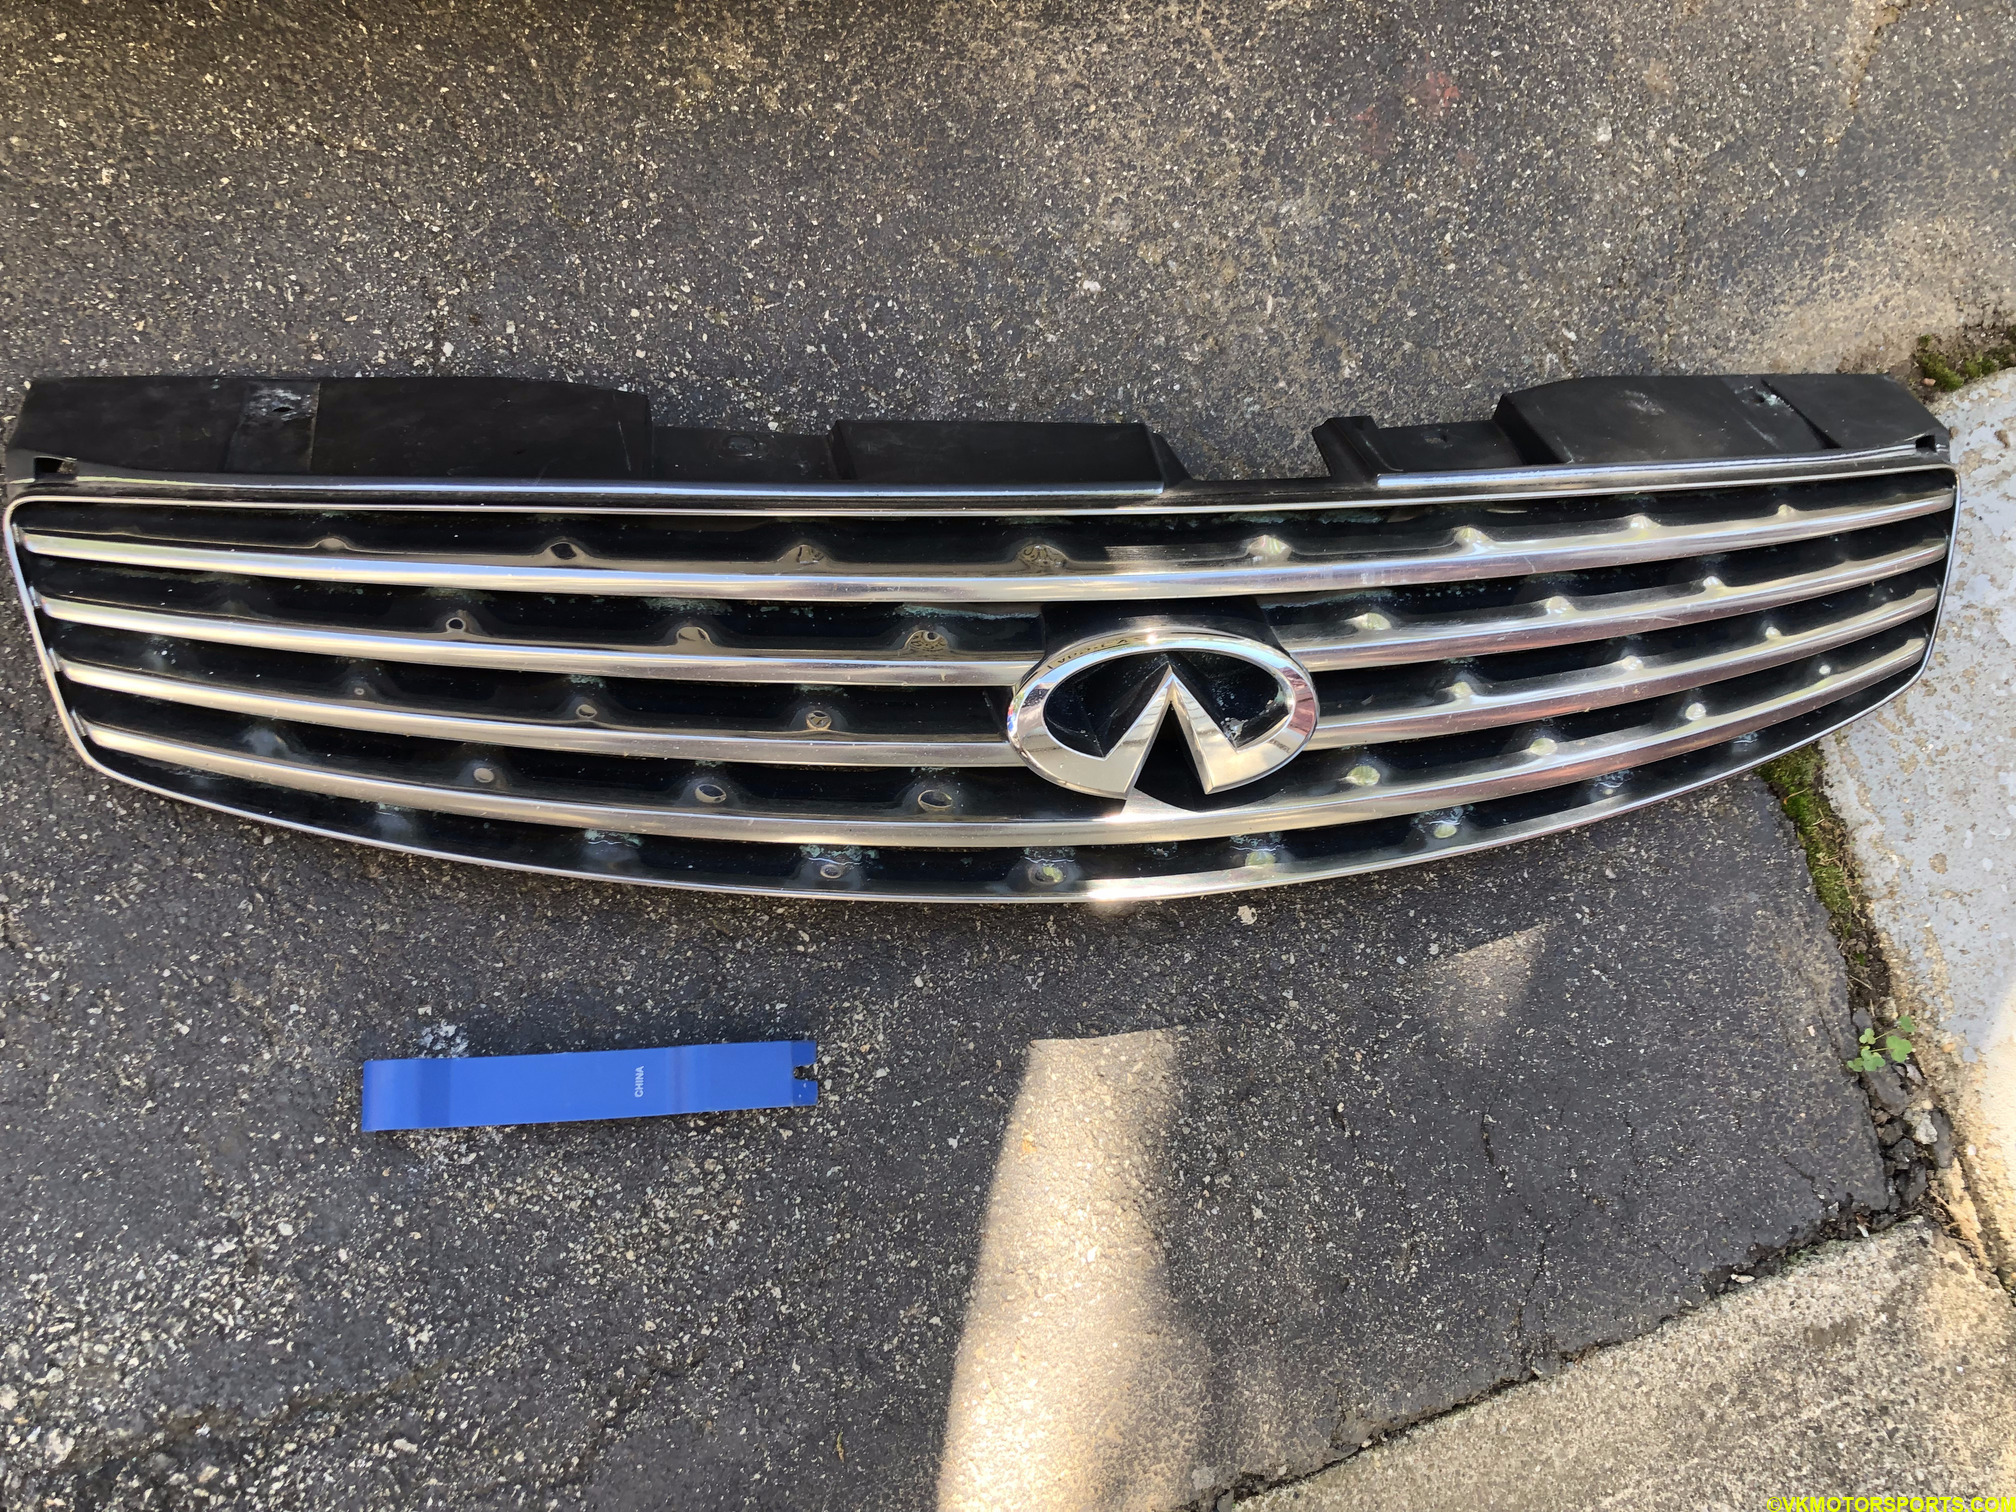 Figure 1. Grille removed with a blue trim removal tool from Harbor Freight